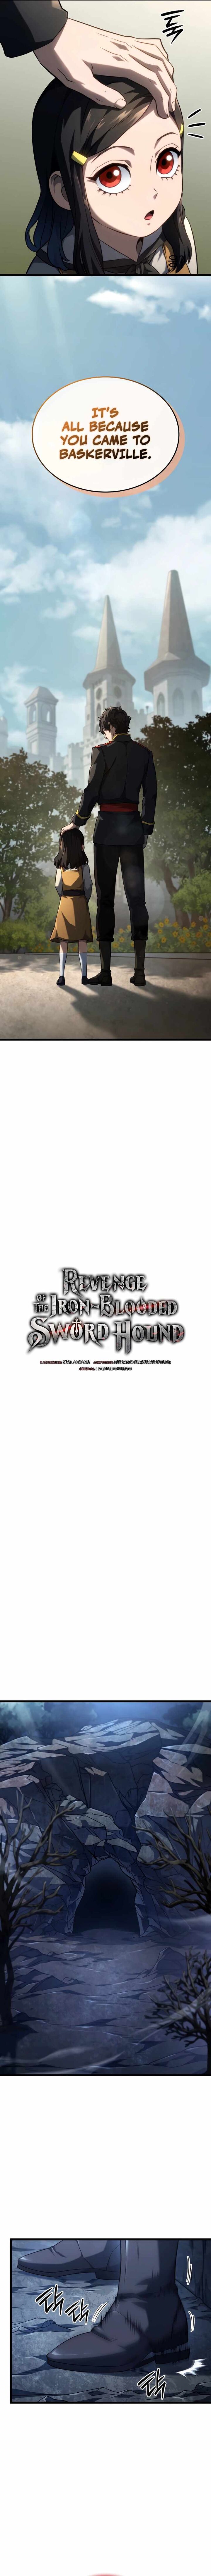 revenge_of_the_iron_blooded_sword_hound_70_6